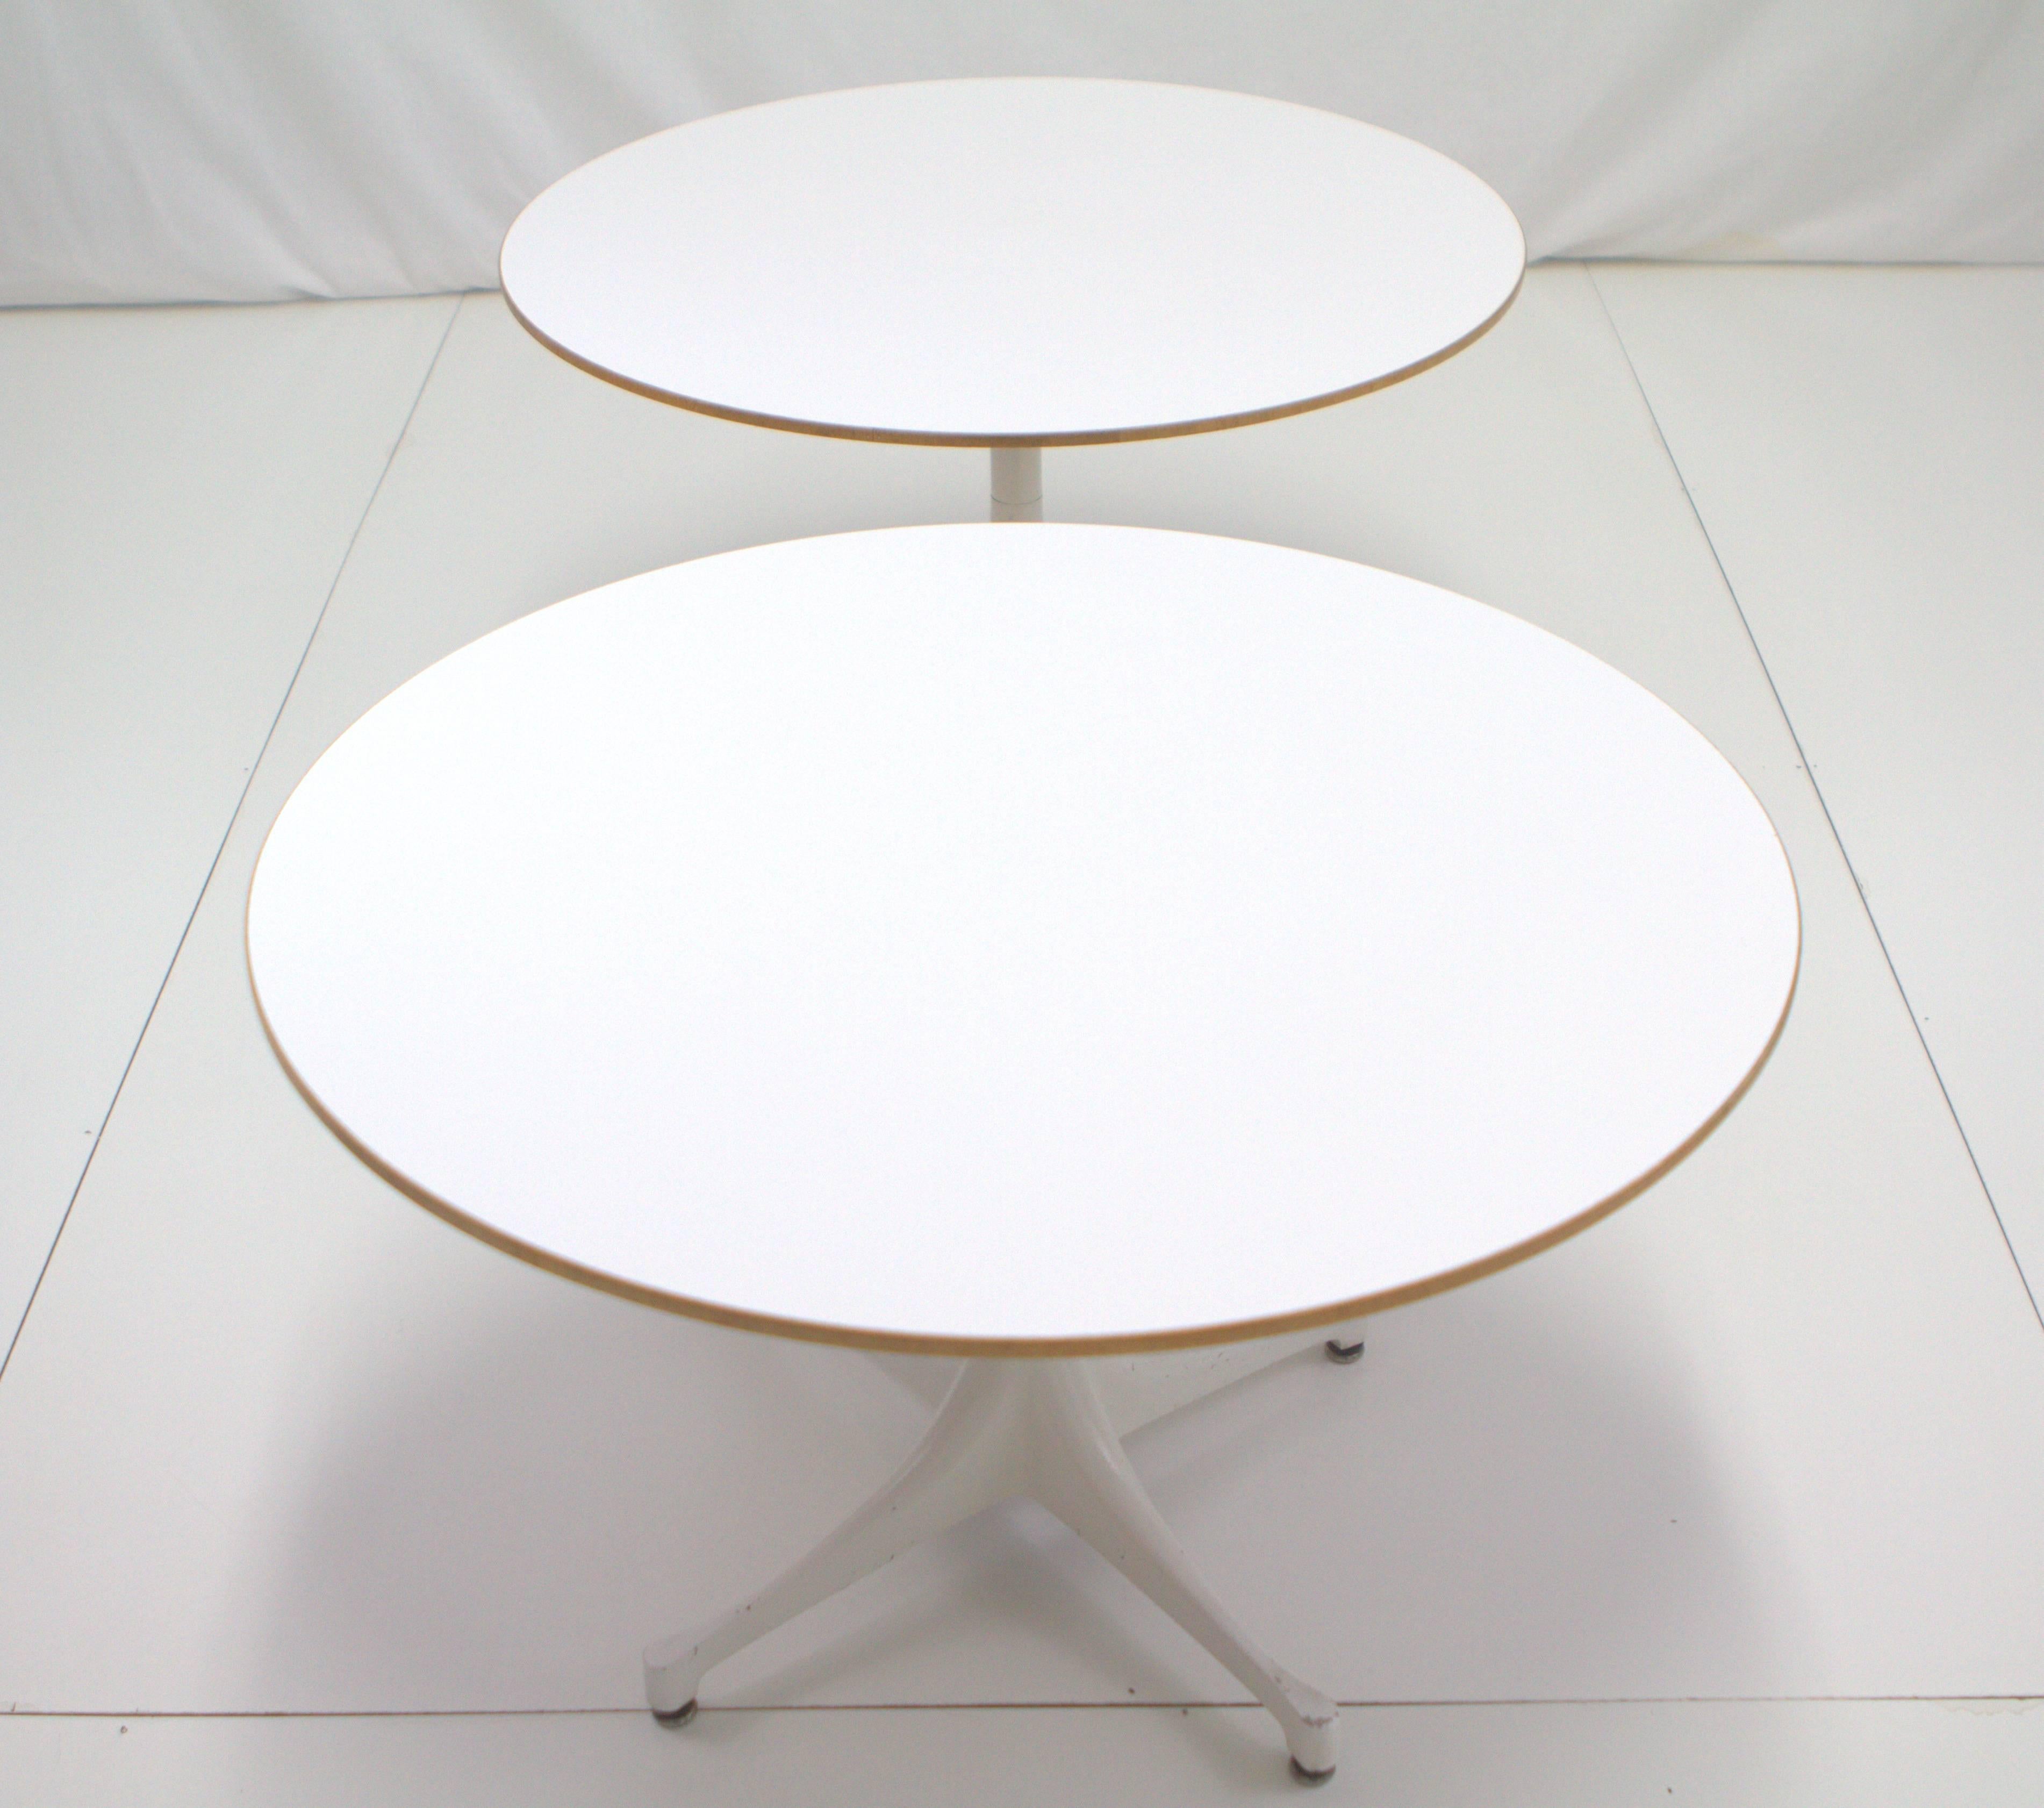 Pair of swag leg round end tables by George Nelson for Herman Miller. White micarta tops banded by wood with swag leg white painted aluminum base. Original vintage condition with wear to base and tops. One table has some veneer missing from wood